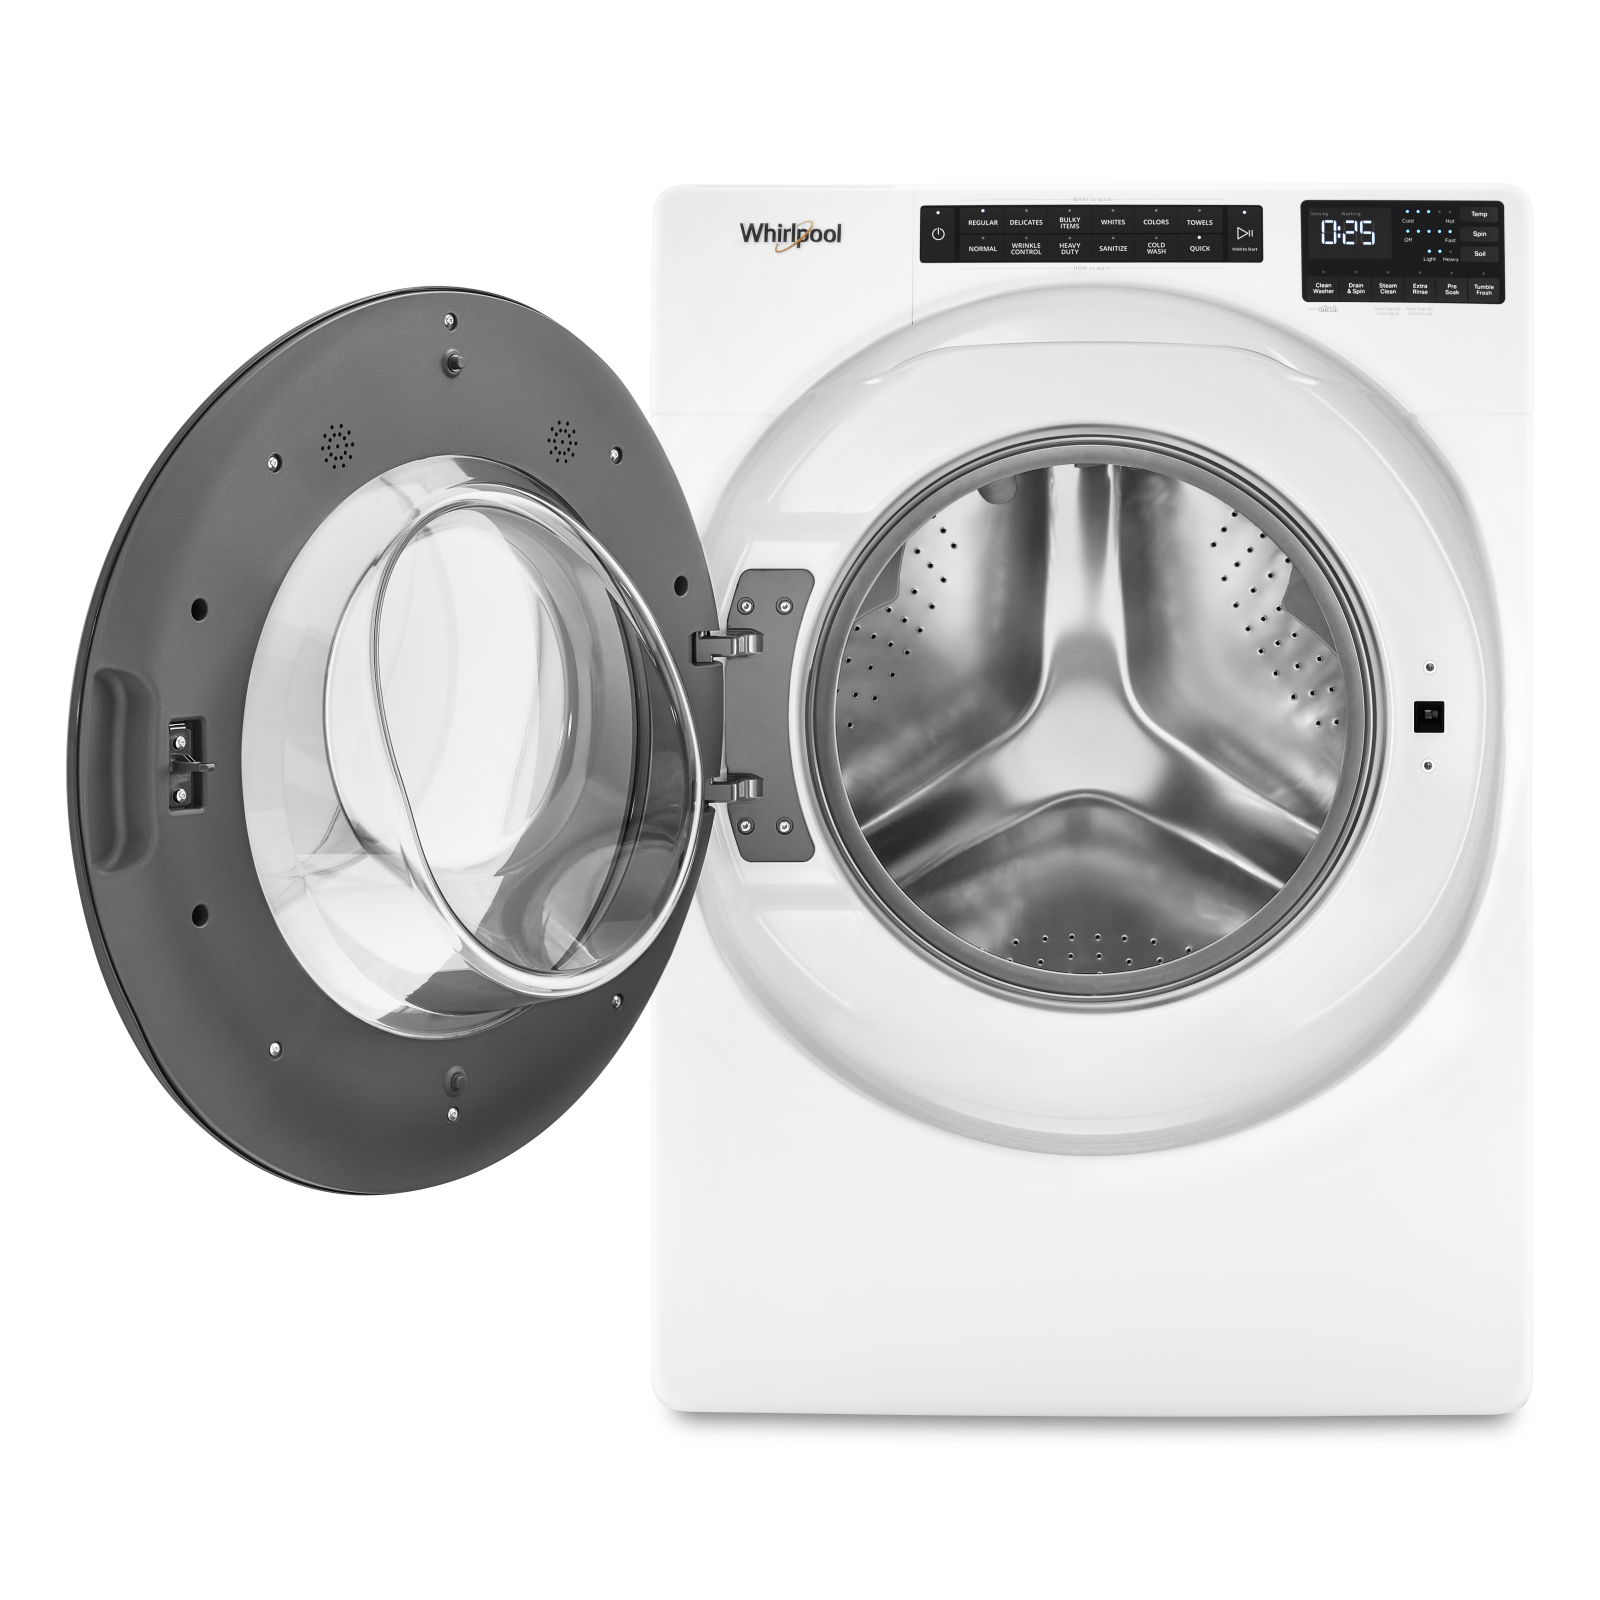 Whirlpool - 5.8 cu. Ft  Front Load Washer in White - WFW6605MW